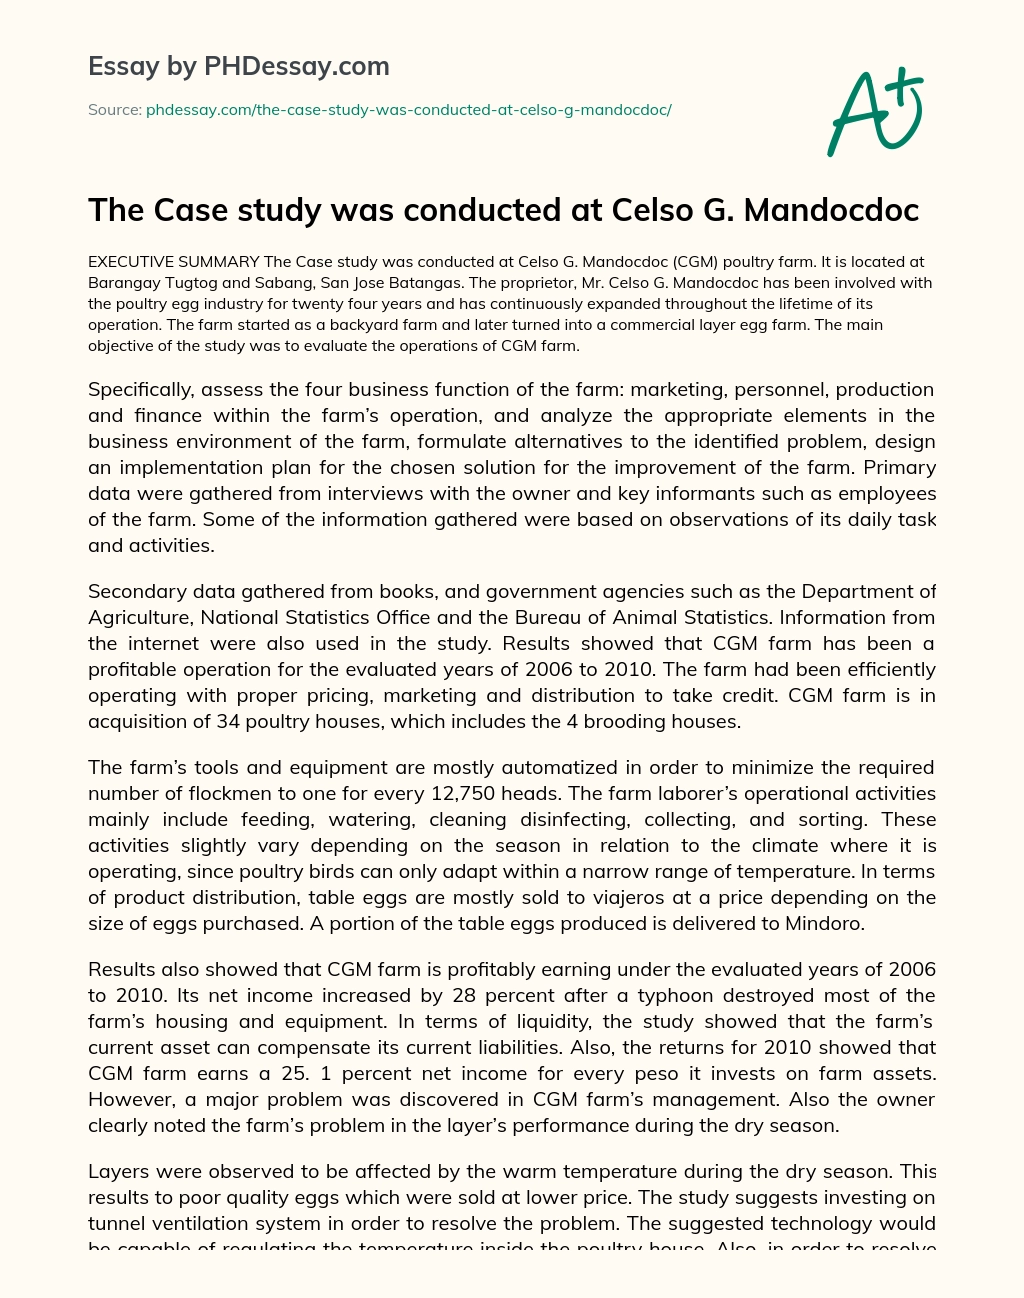 The Case study was conducted at Celso G. Mandocdoc essay